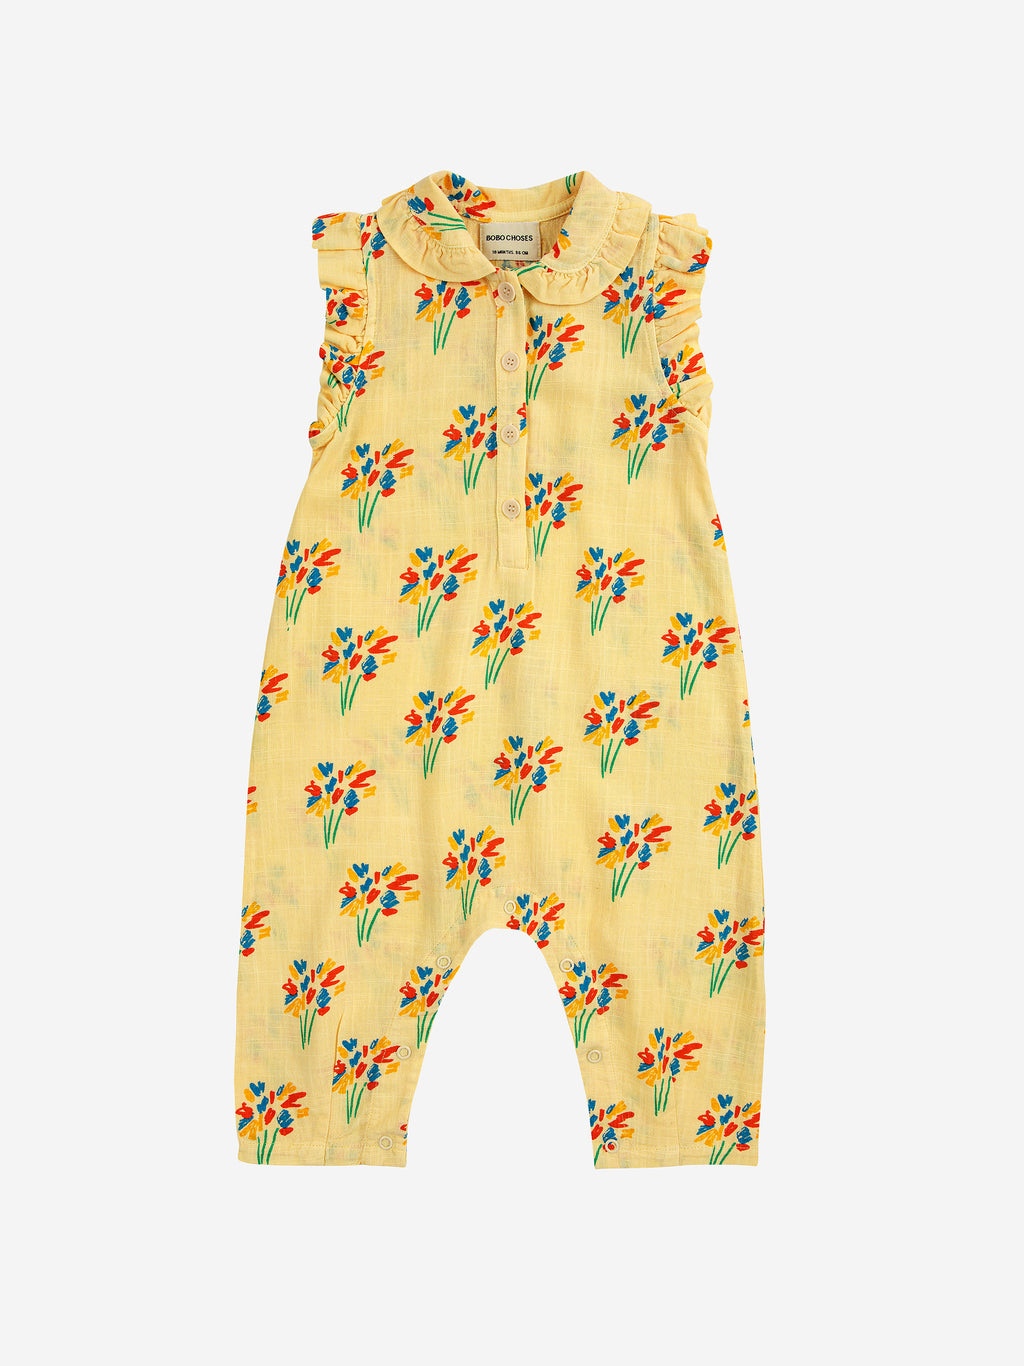 Bobo Choses Baby Fireworks All Over Woven Overall - Light Yellow